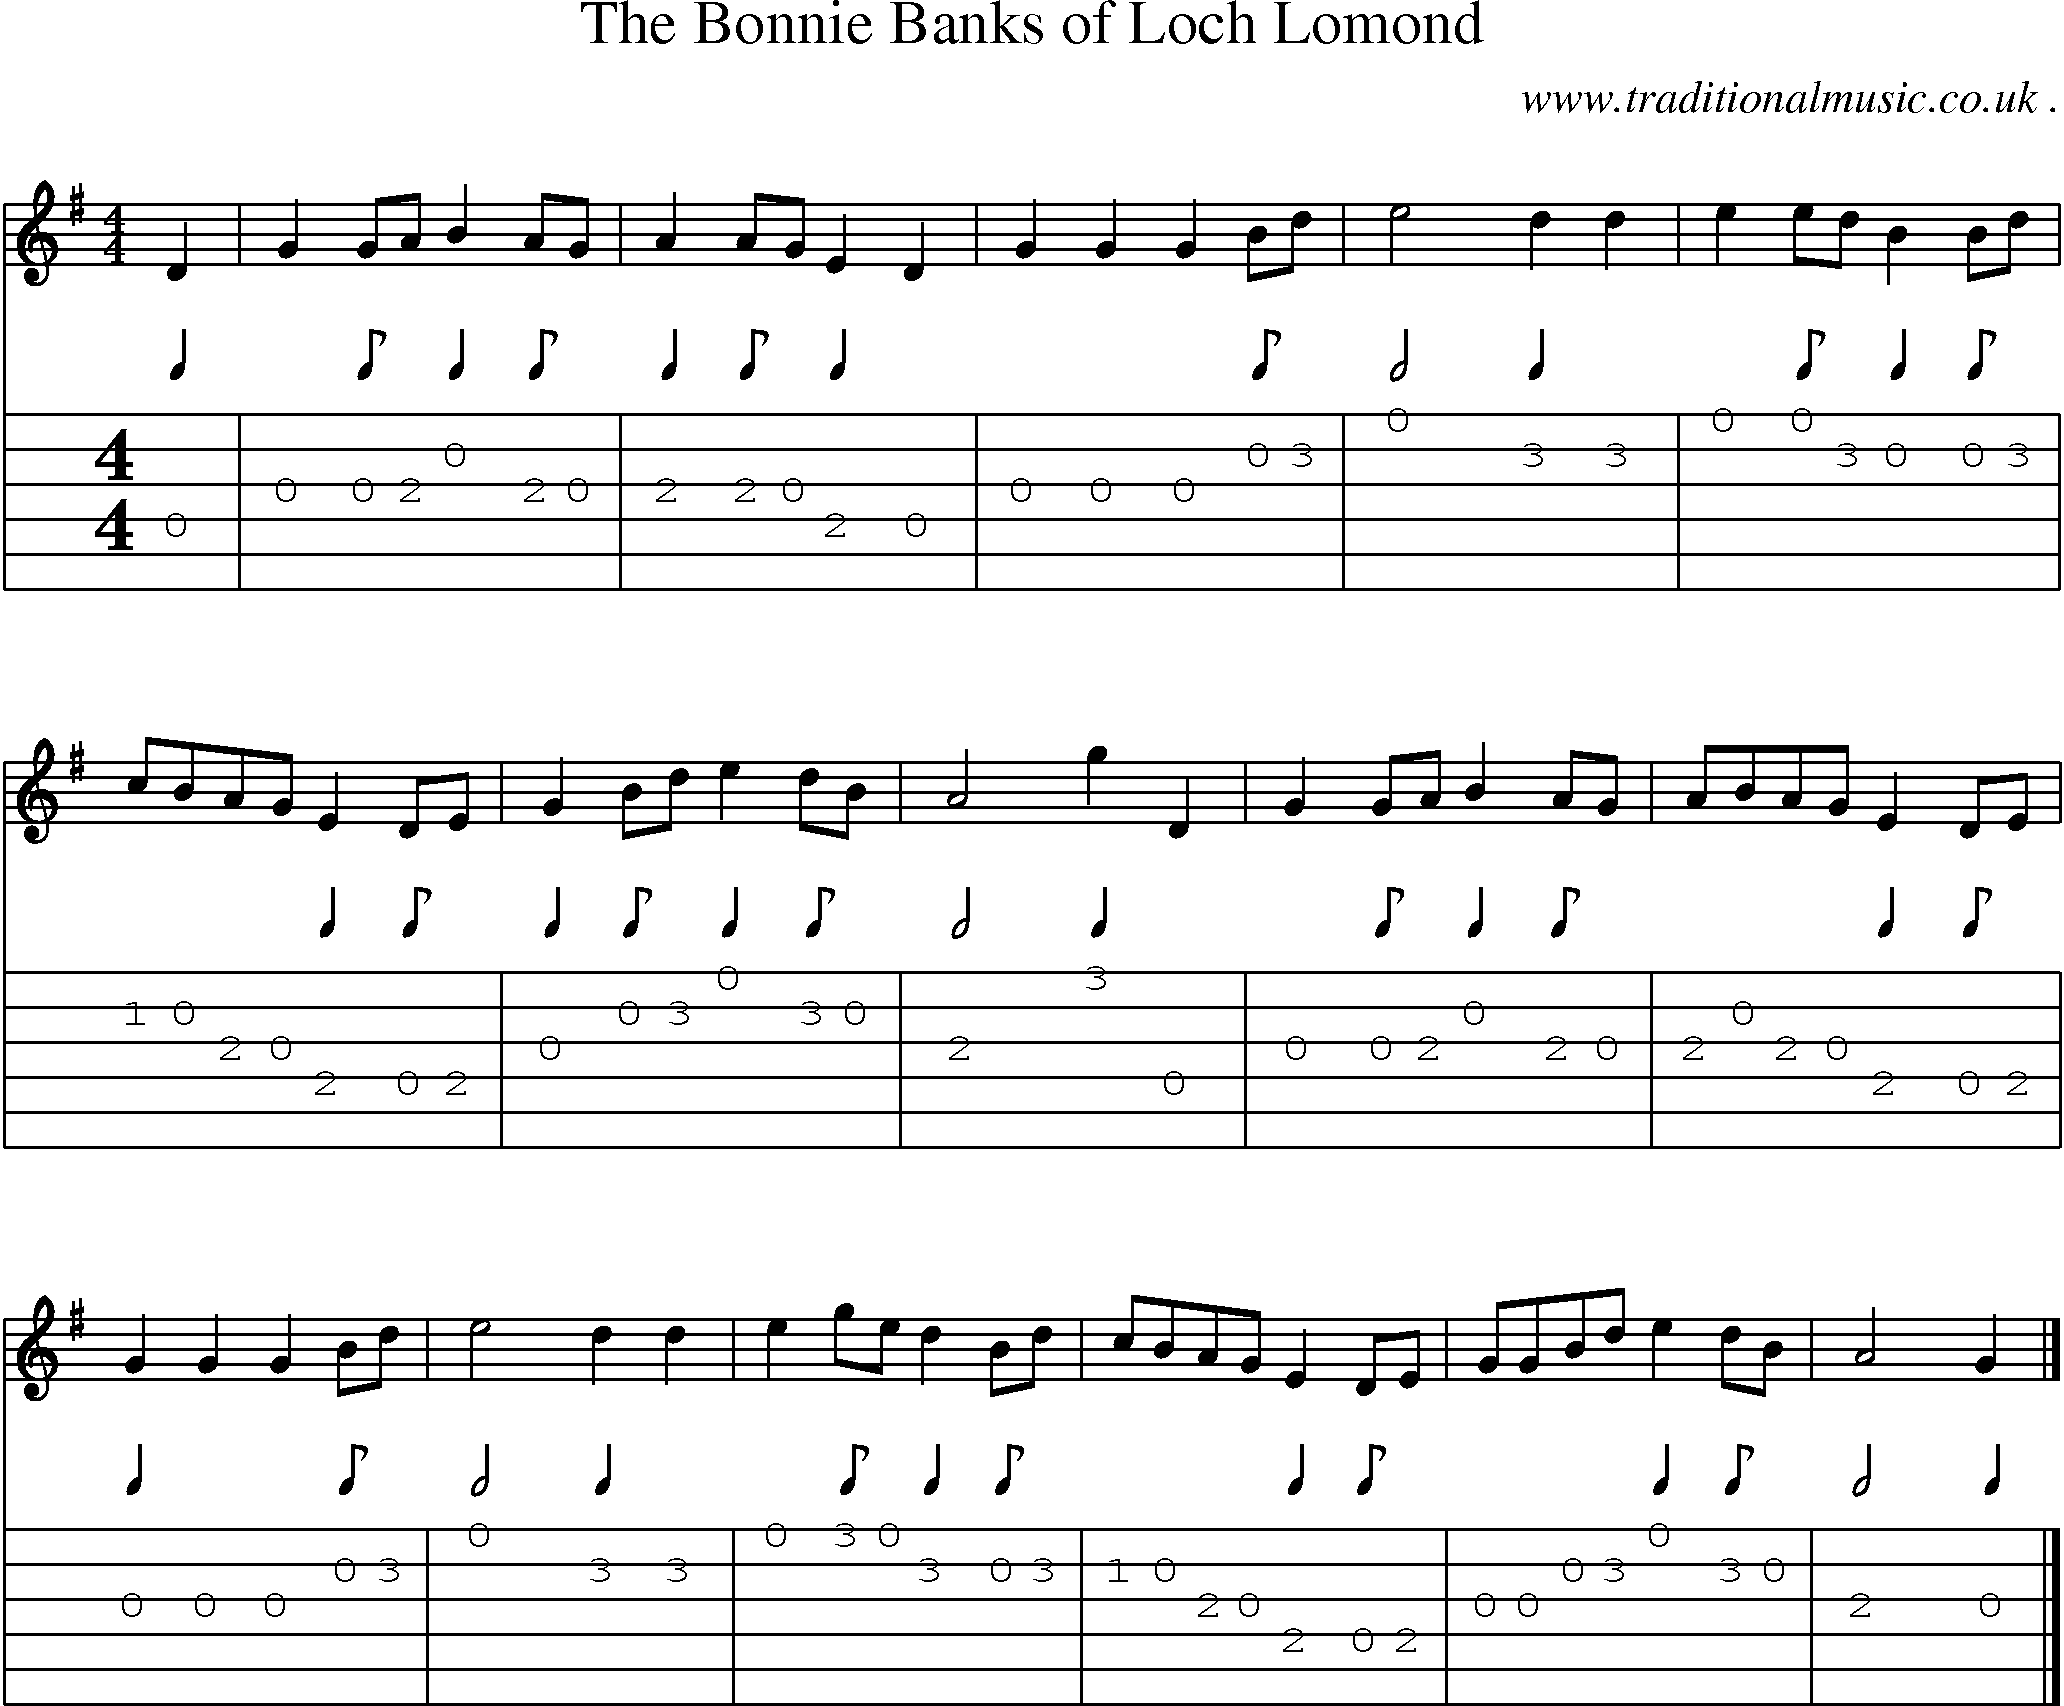 Sheet-music  score, Chords and Guitar Tabs for The Bonnie Banks Of Loch Lomond